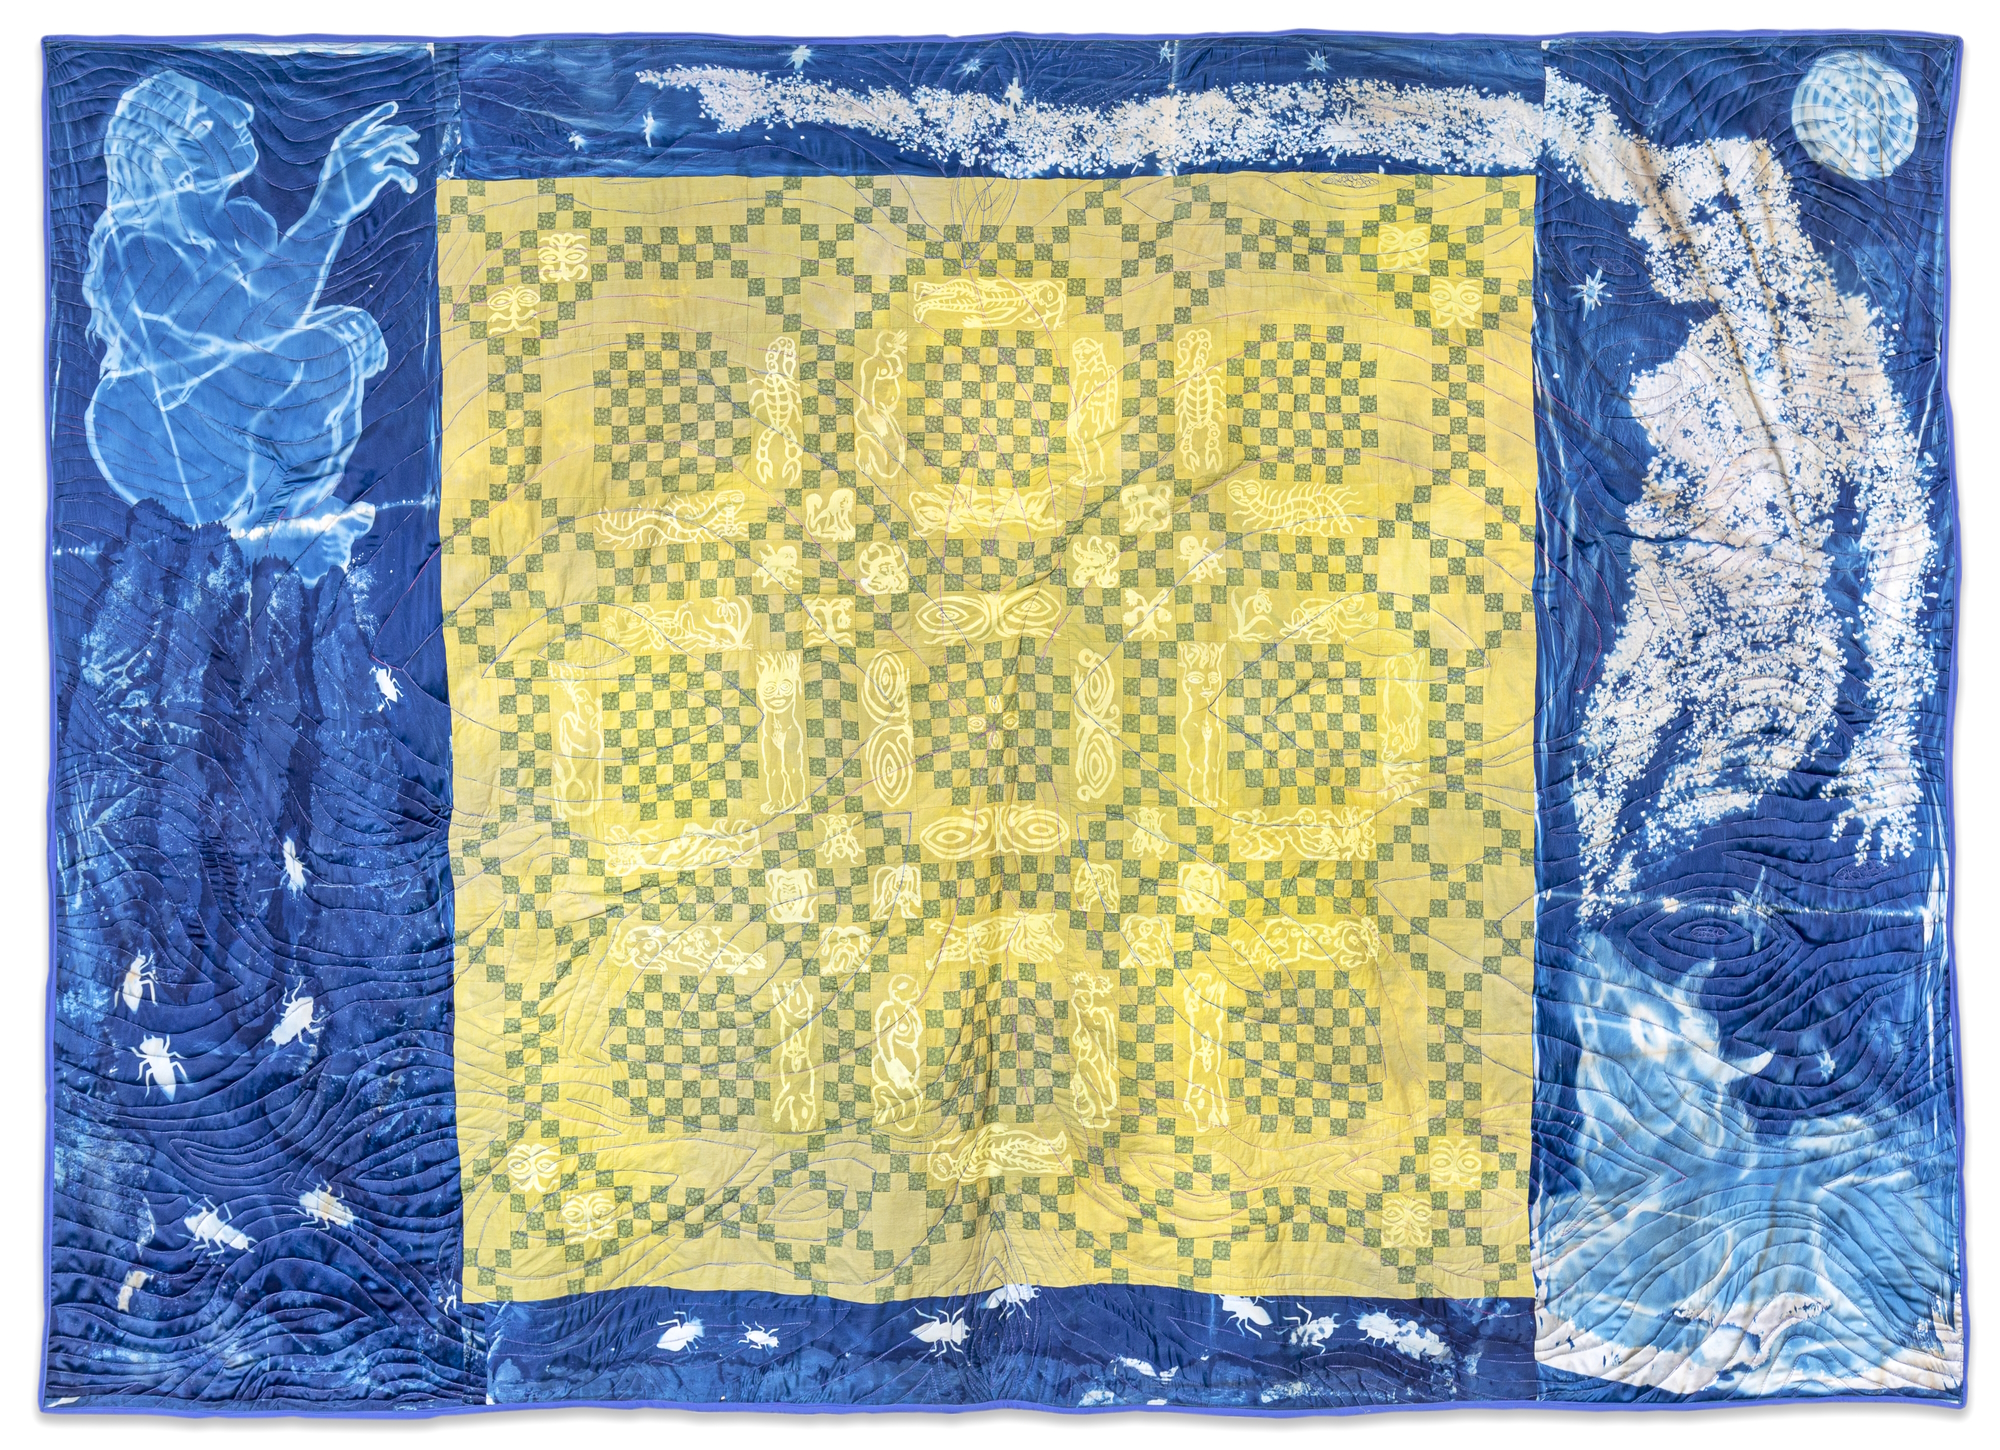 Tura Oliveira, O Spirits of whom my soul is but a little finger, Direct it to the lid of its flesh-eye (They begin their journey into the brutality garden, the cosmic hedge maze), 2022. Hand-dyed cotton and cyanotype on silk. Courtesy of the artist and Geary Contemporary, NY; Photo: Walker Esner